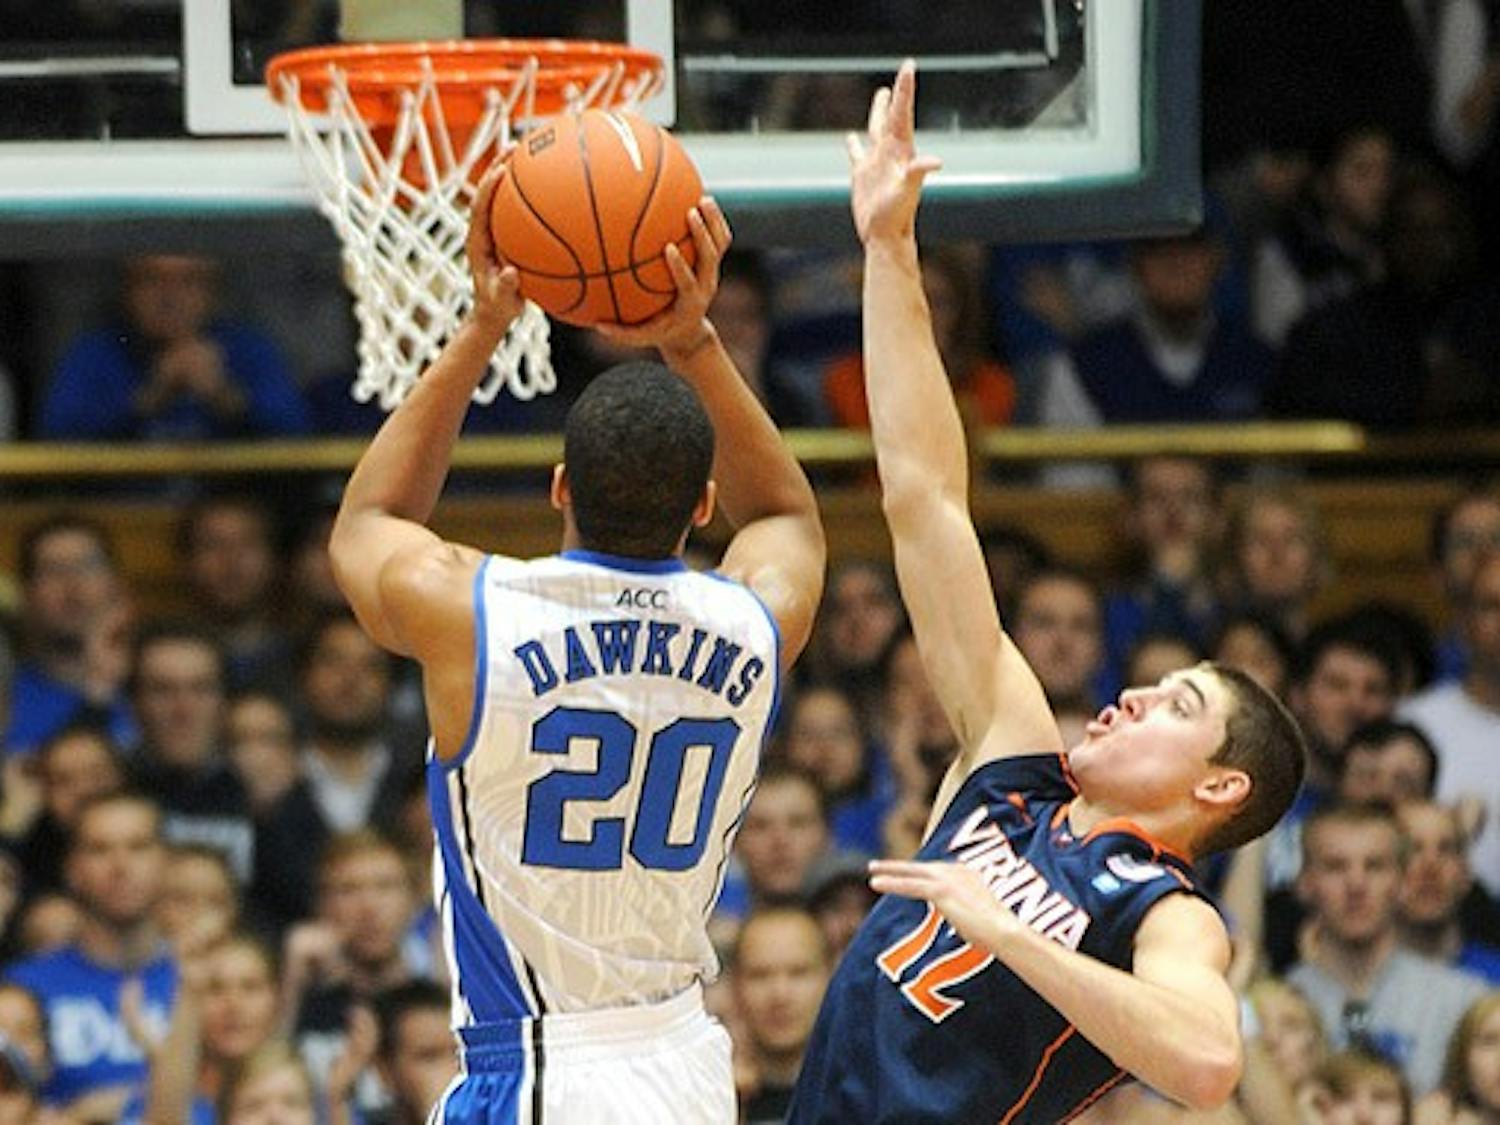 Andre Dawkins spurred Duke’s second period effort with three 3-pointers and 12 total points after the half.